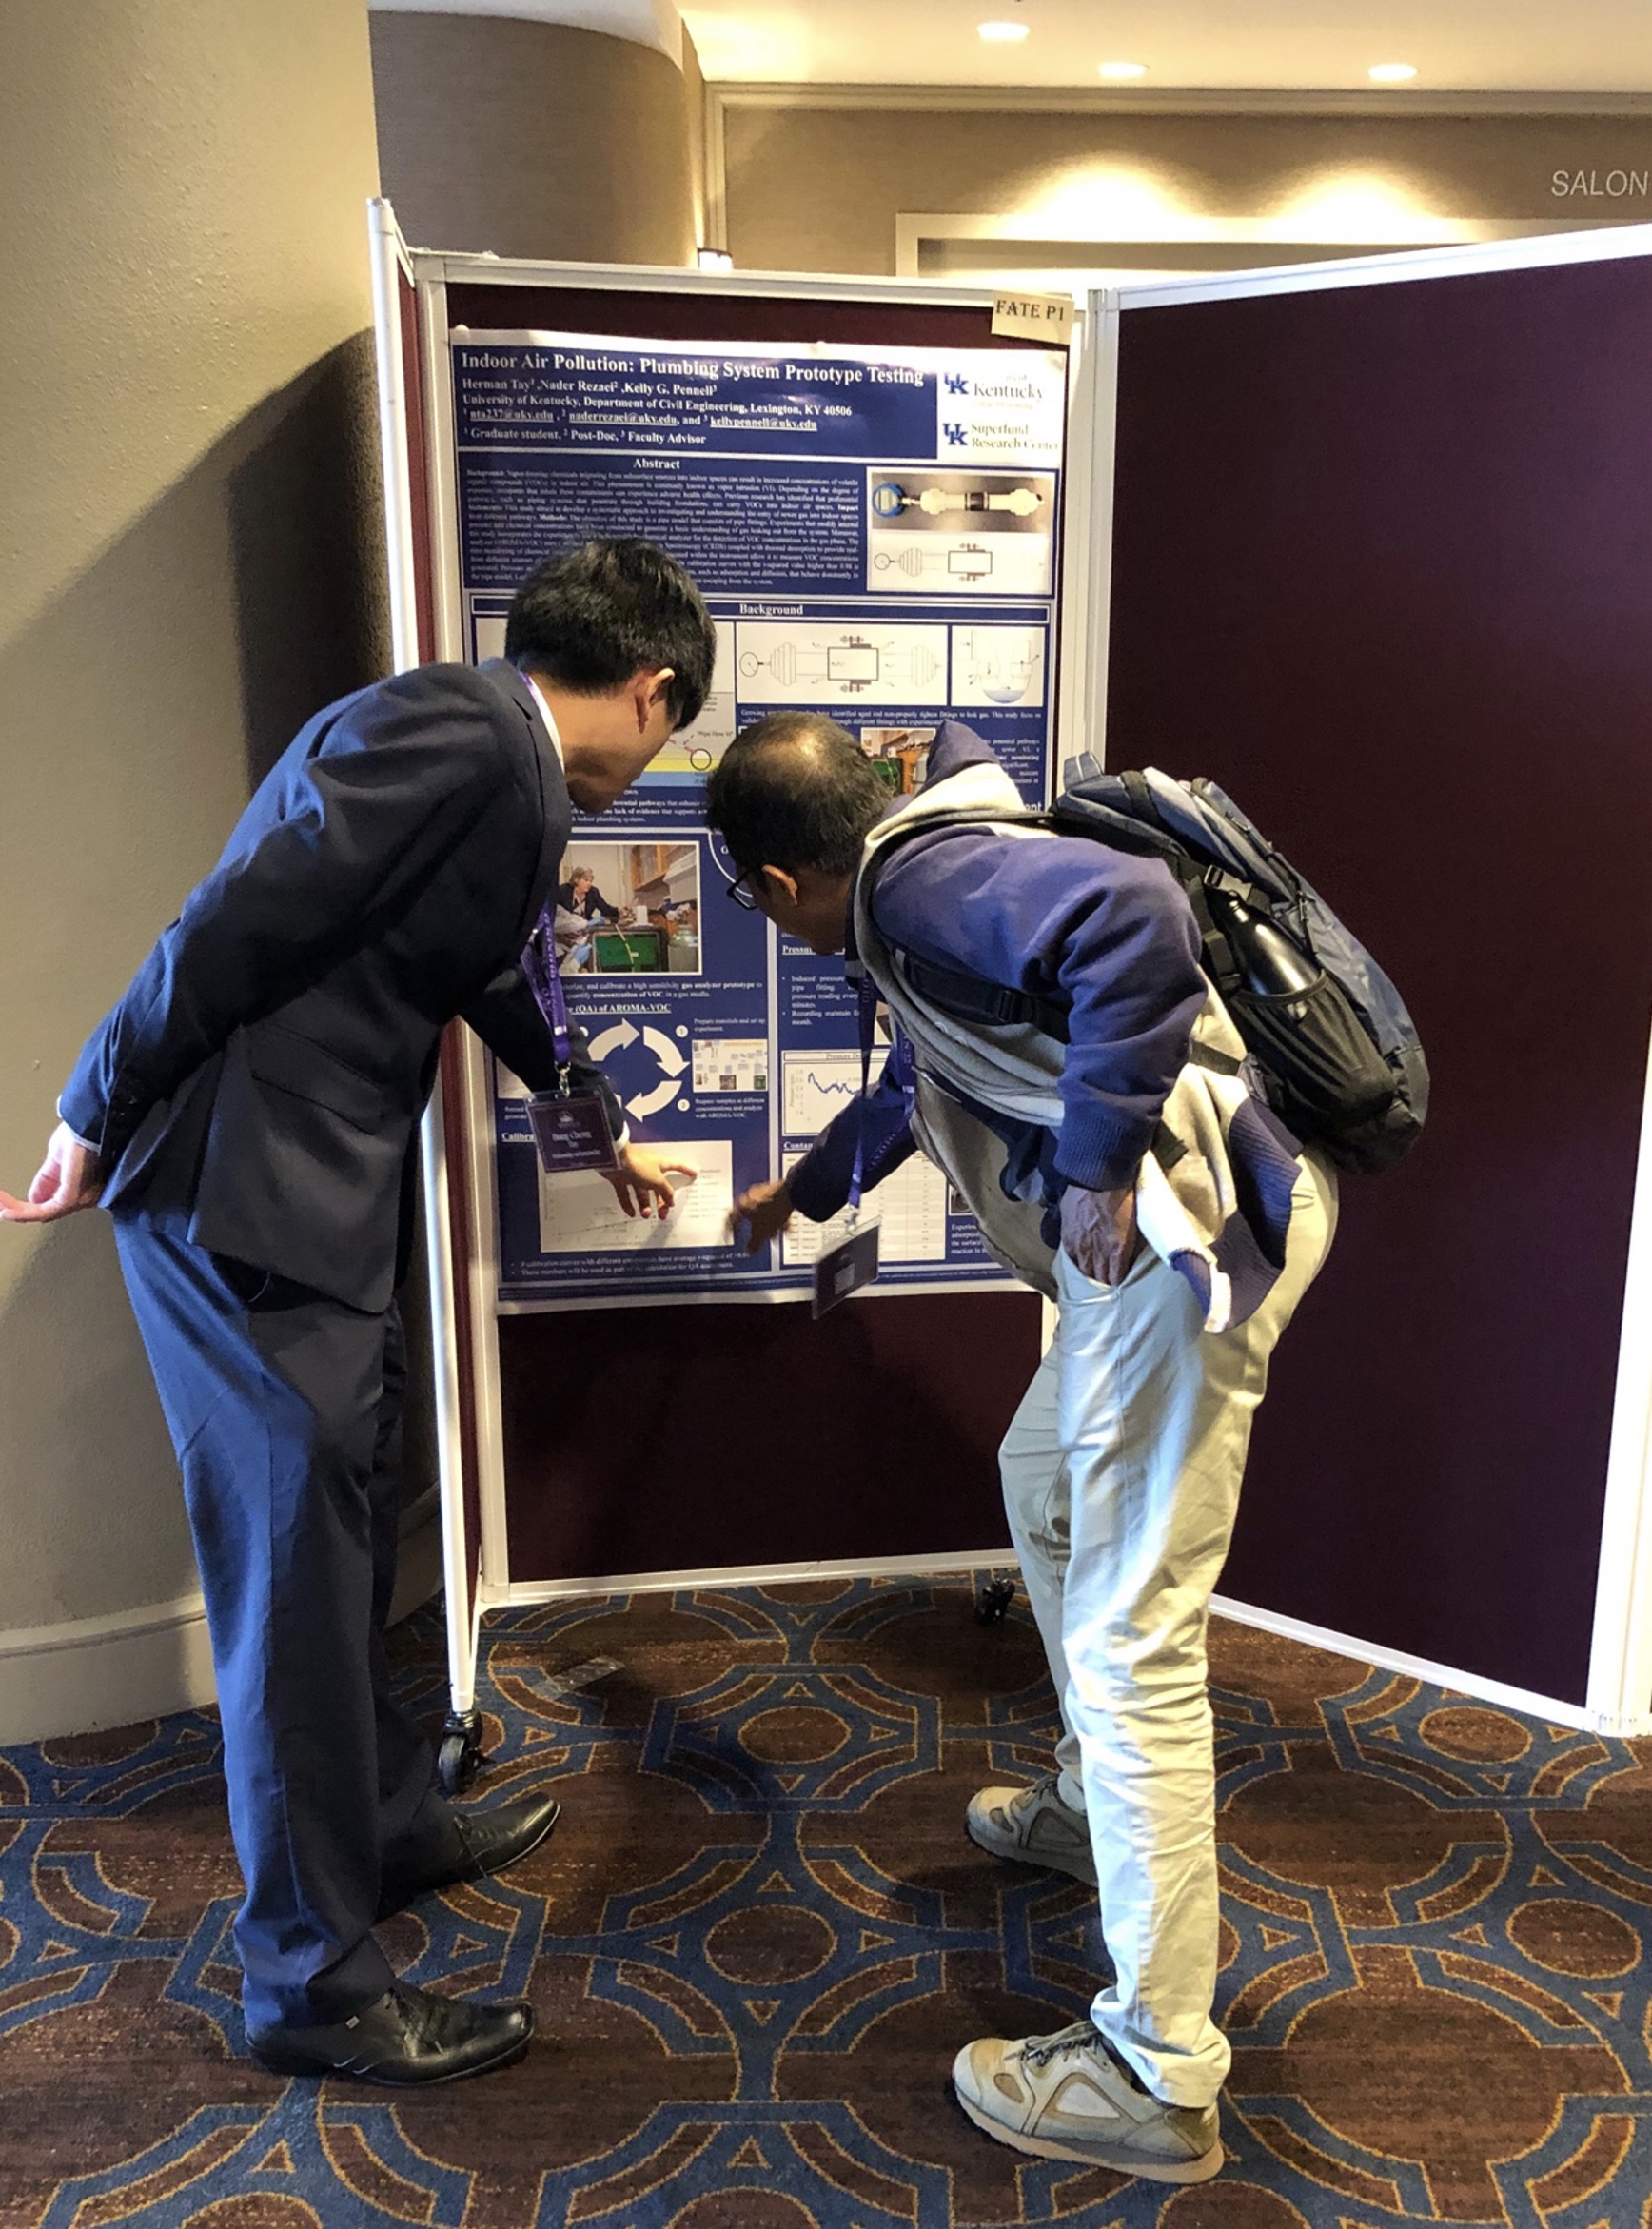 Civil Engineering doctoral student Hong Cheng (Herman) Tay discussing details of his research poster to a conference attendee.  His poster is entitled “Indoor Air Pollution: Plumbing System Prototype Testing.” Co-authors: Nader Rezaei, PhD and Kelly G. Pe